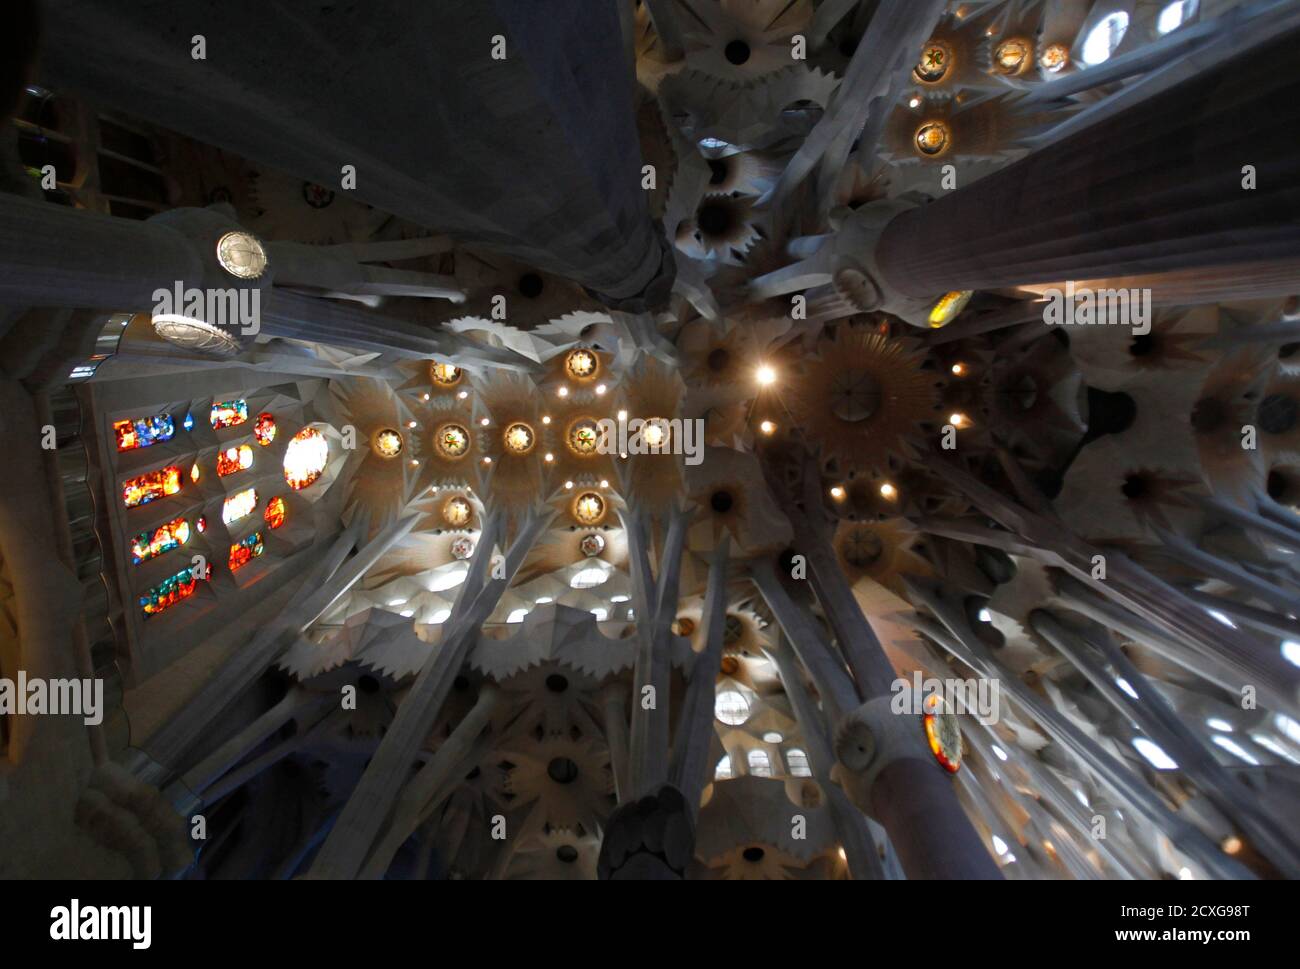 A view of Basilica Sagrada Familia's ceiling during the 'Atrio de los Gentiles', a dialogue between Christians and pagans, in Barcelona, May 18, 2012. REUTERS/Albert Gea (SPAIN - Tags: RELIGION) Stock Photo